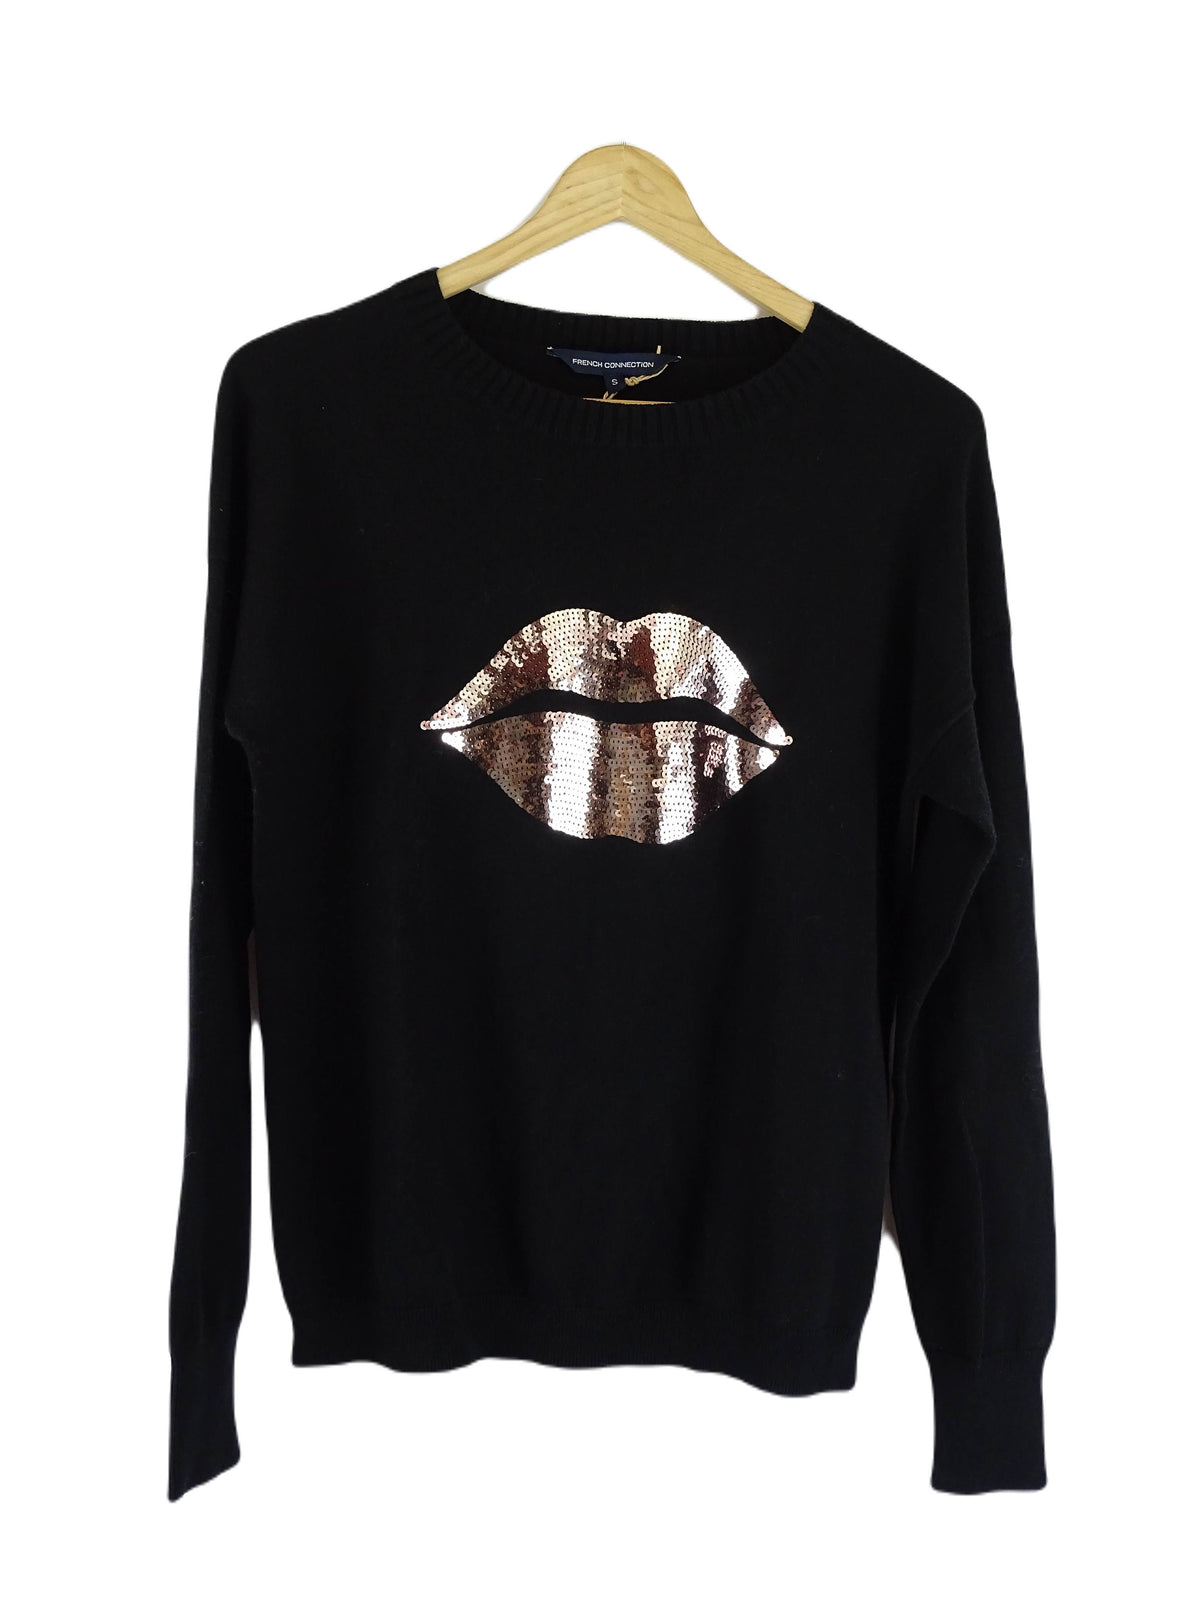 French Connection Black Knit Sweater with Sequins S